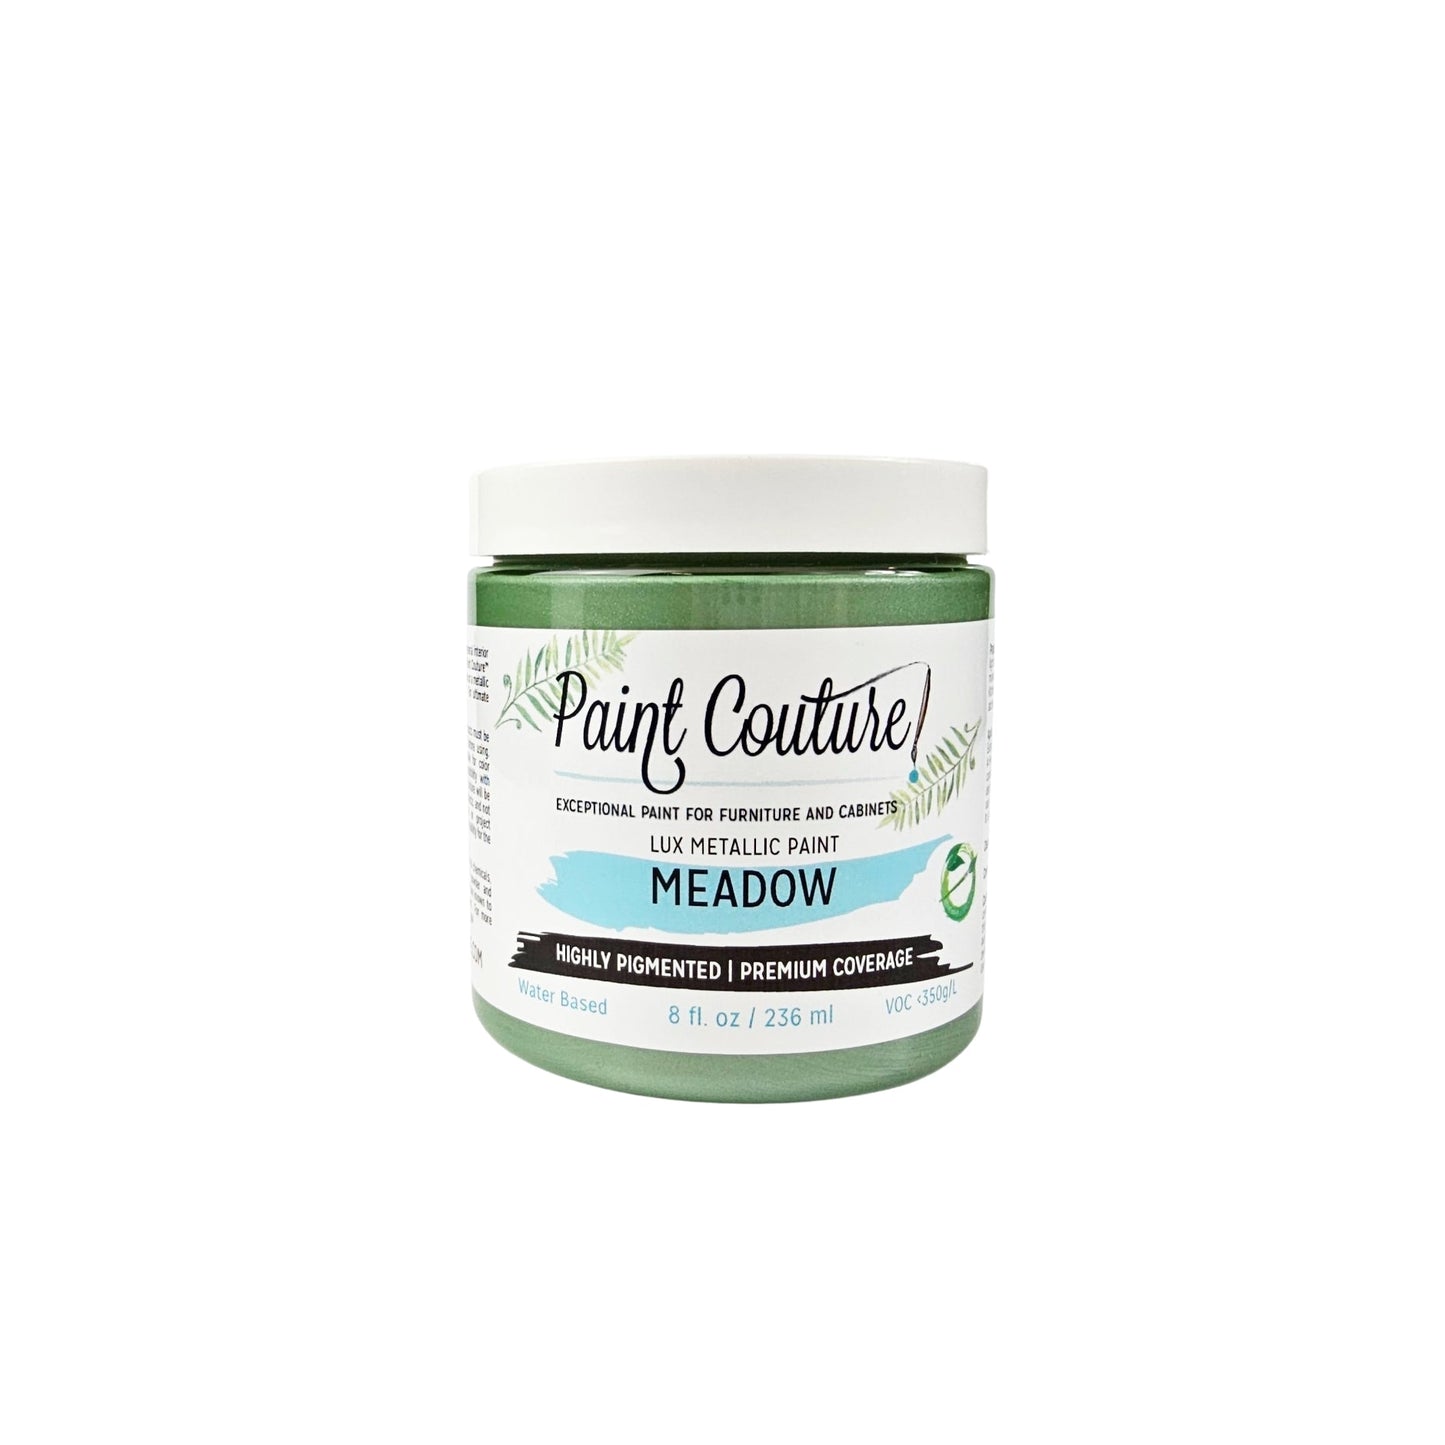 Meadow Paint Couture Lux Metallic Paint